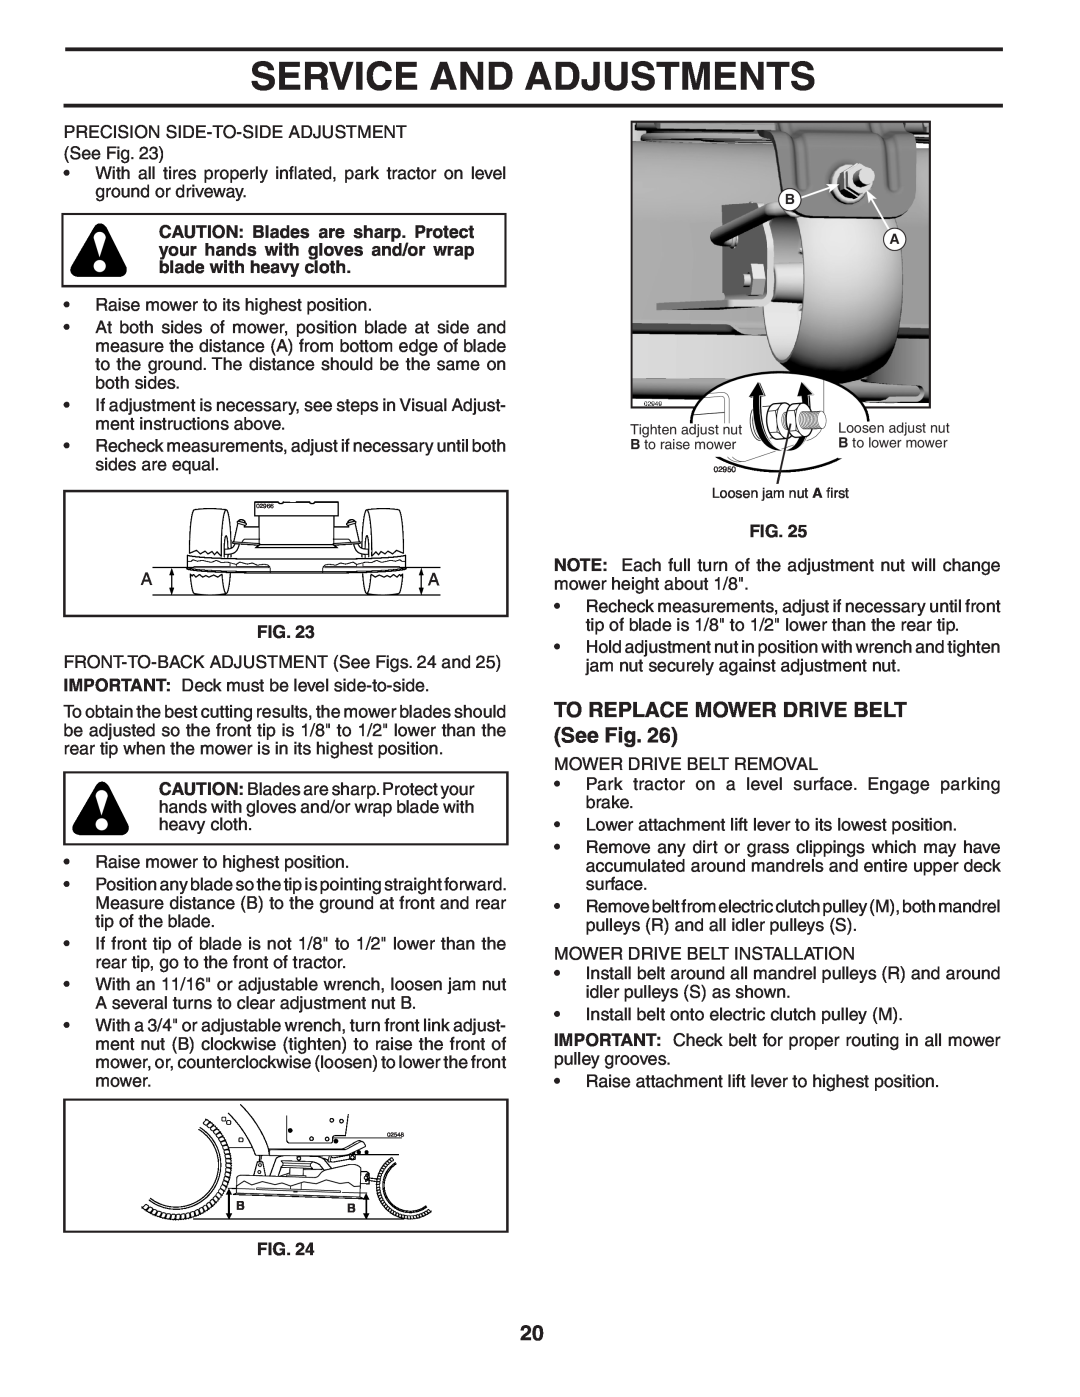 Poulan 403808 manual TO REPLACE MOWER DRIVE BELT See Fig, Service And Adjustments 